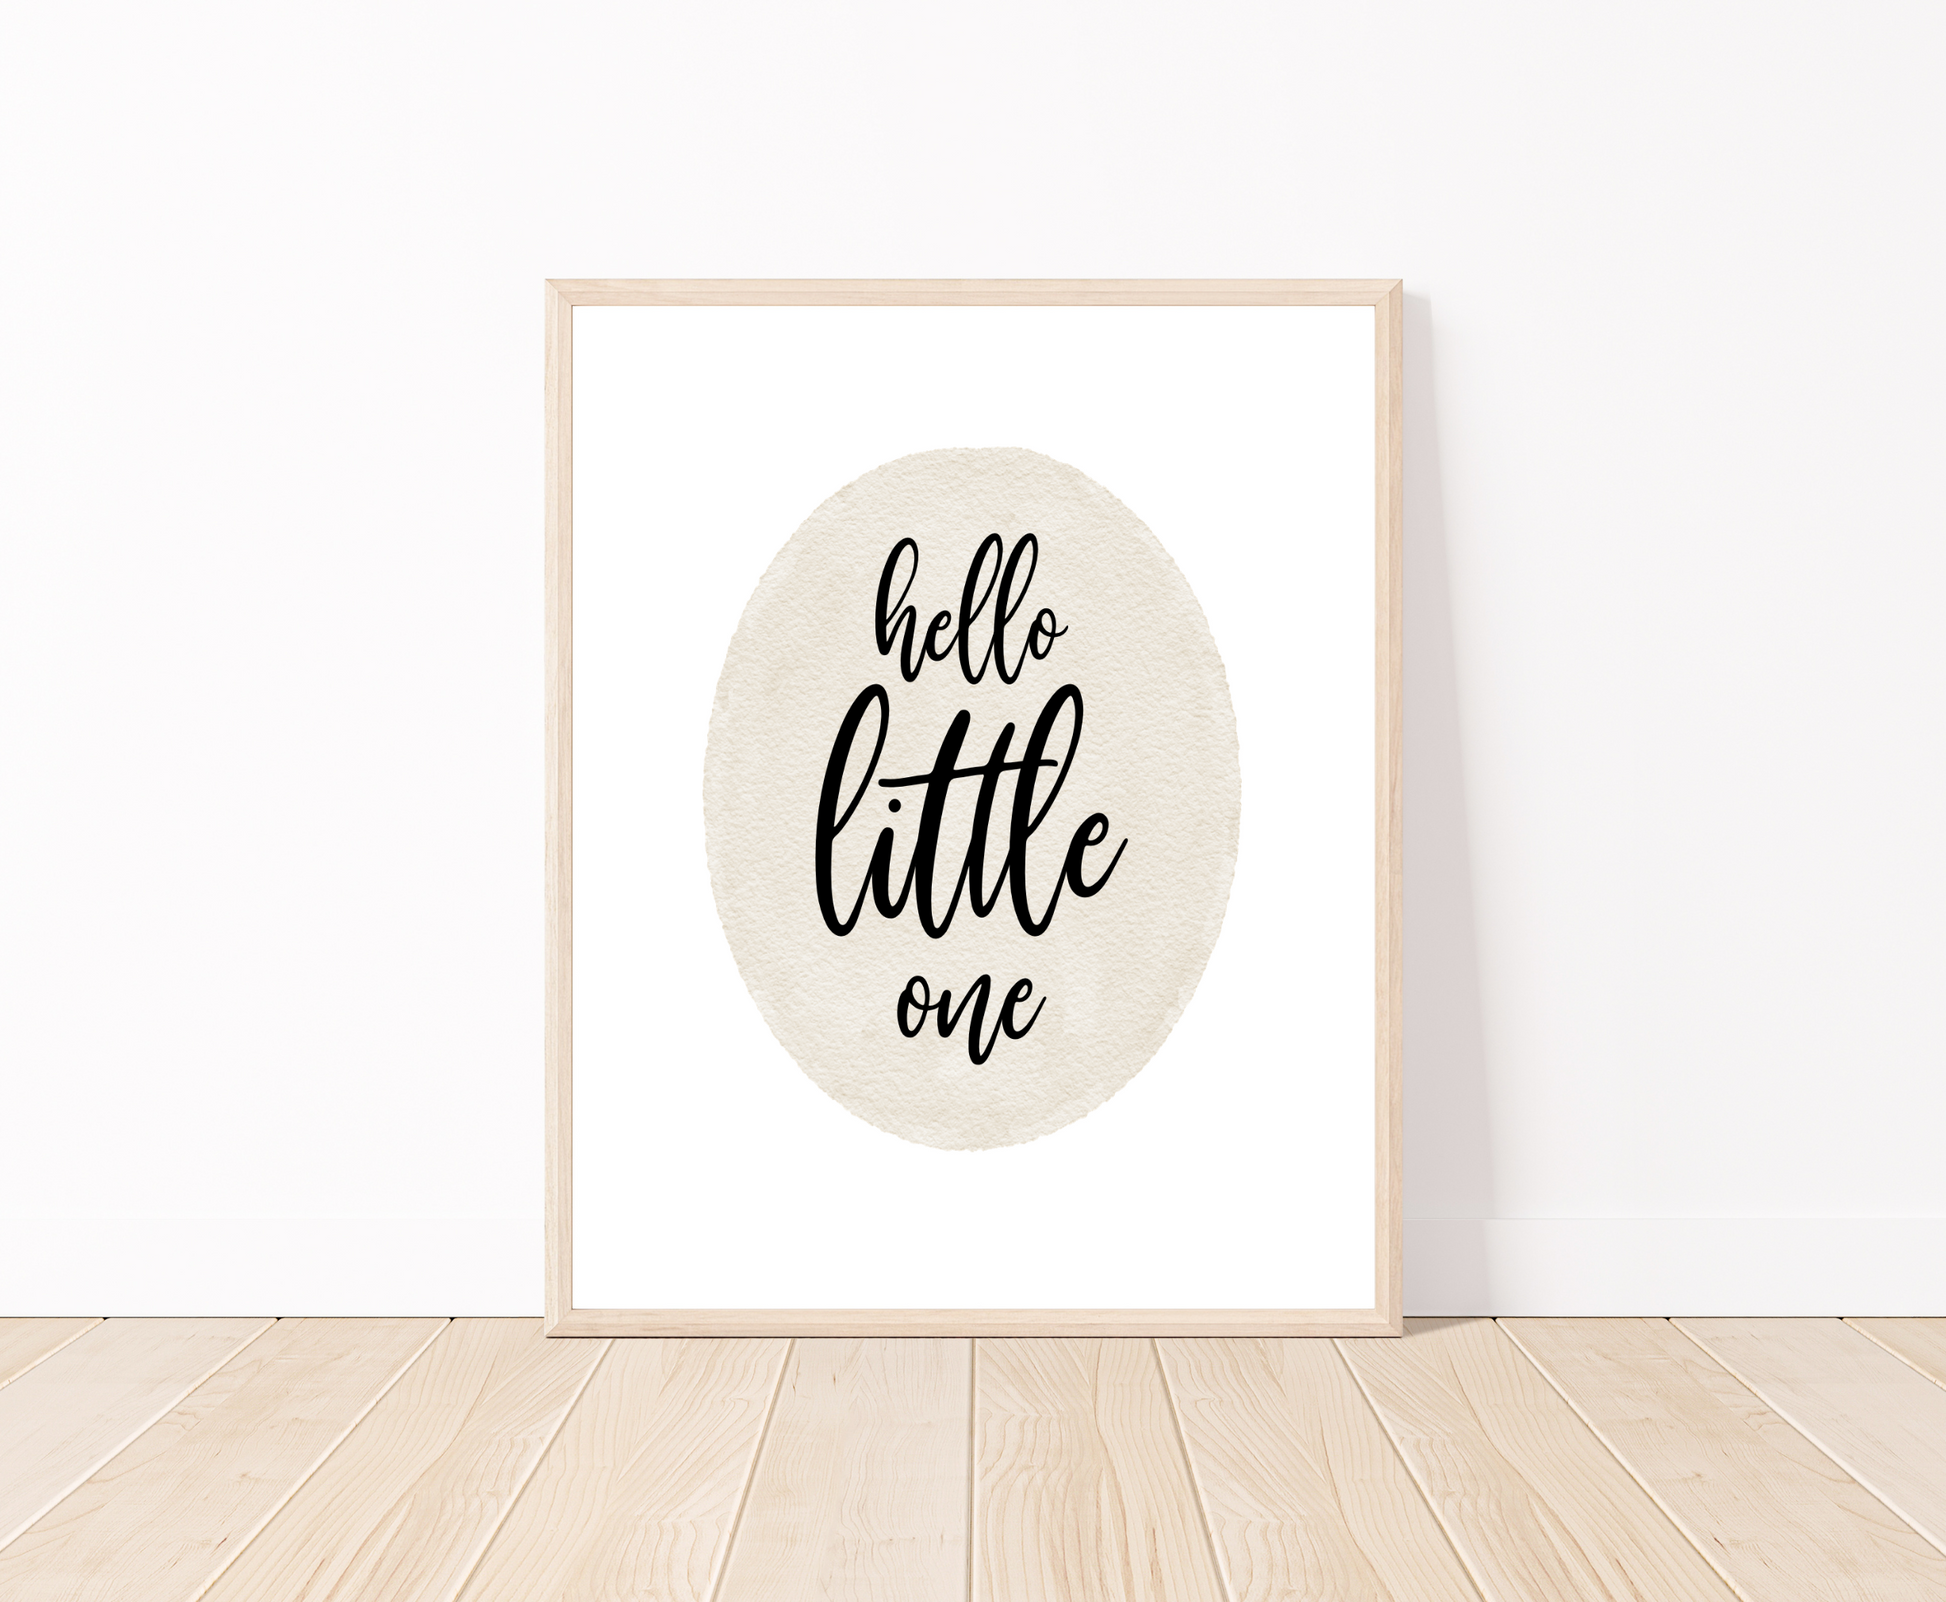 A digital print placed on a white wall and parquet flooring showing a grey oval shape that says “Hello little one”